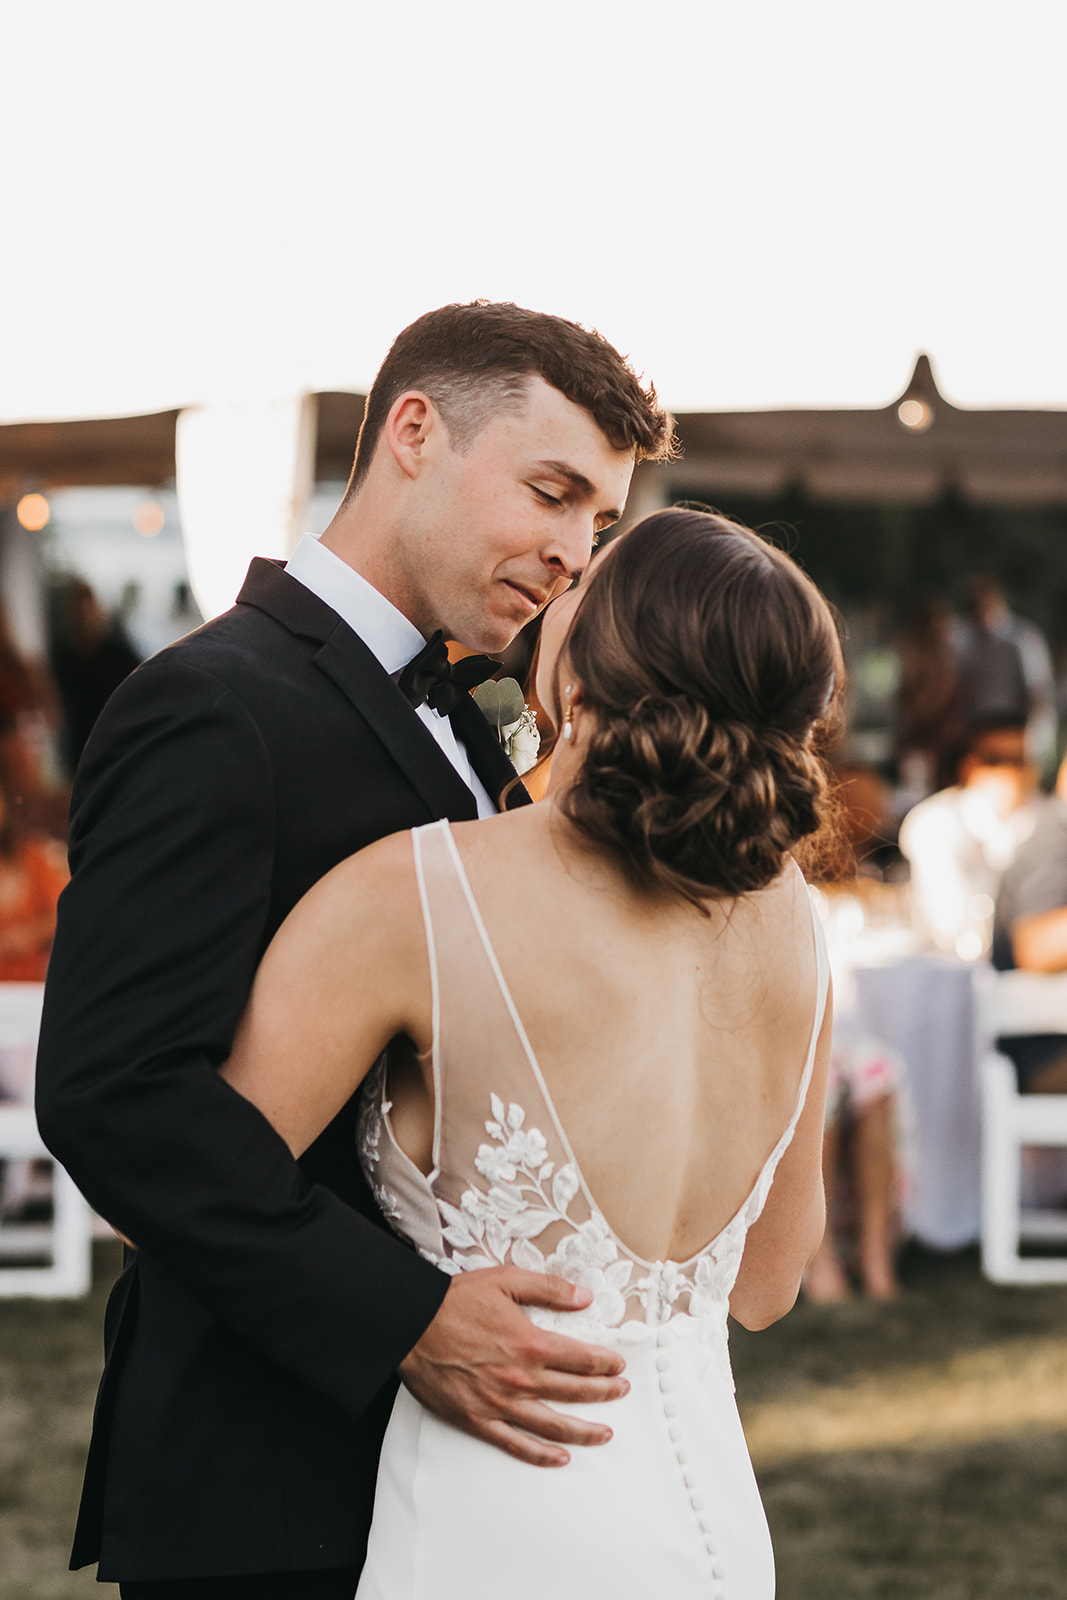 Bride and groom share first dance as husband and wife at private lake house wedding. 